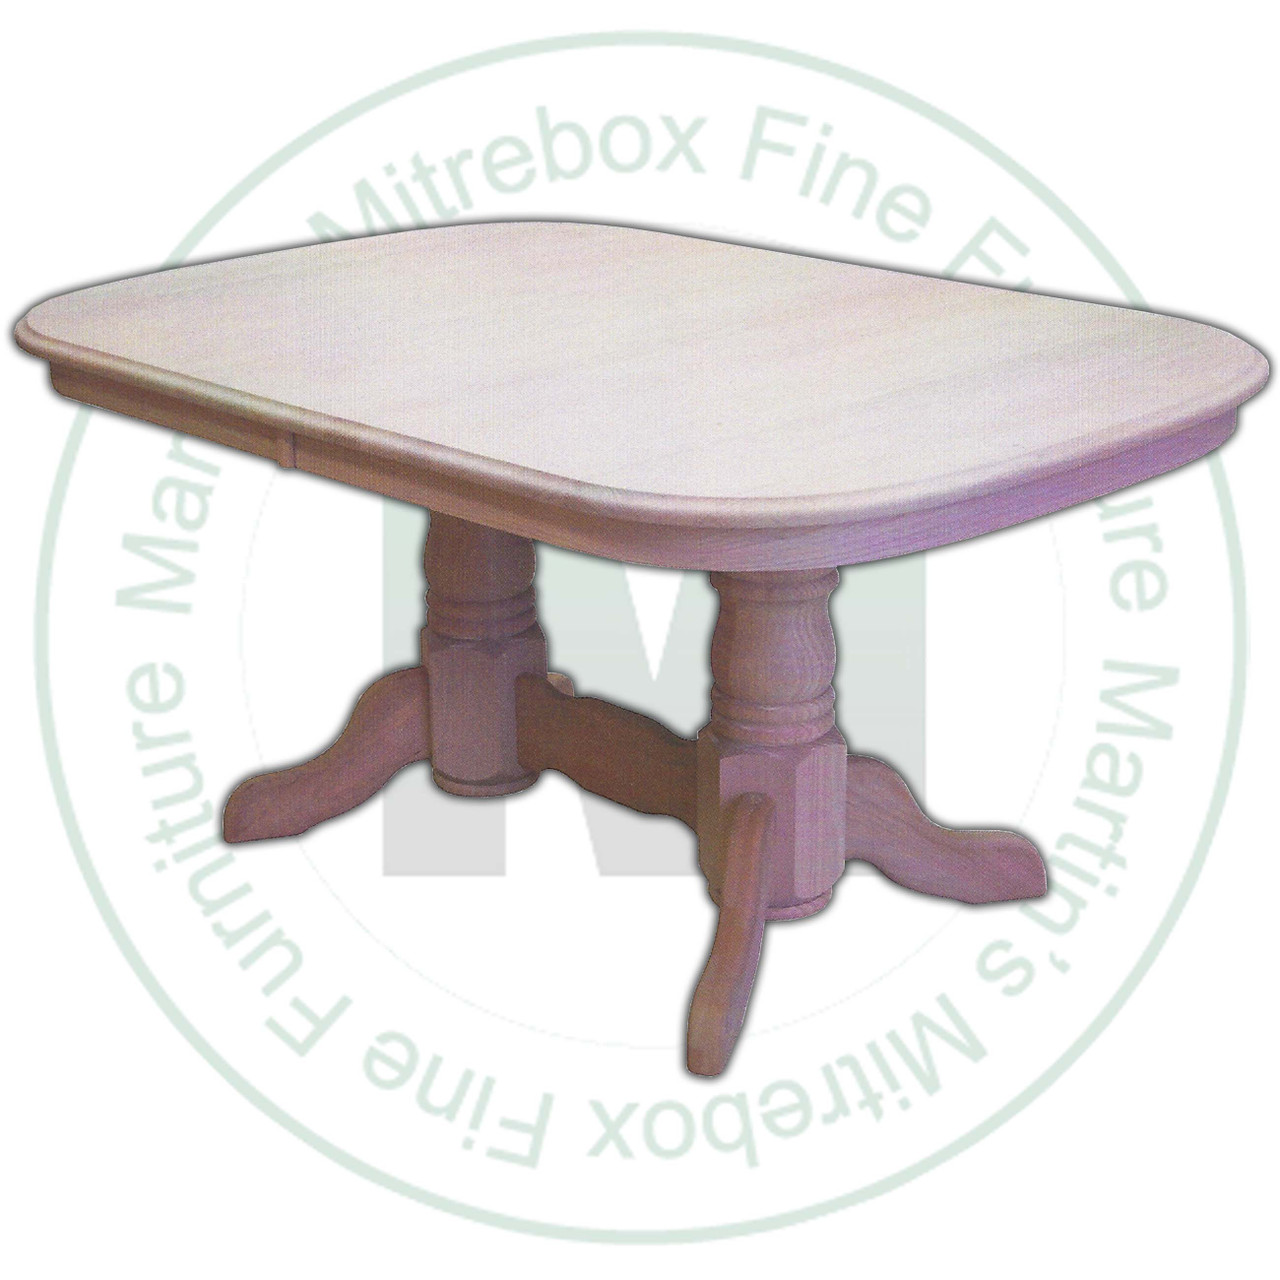 Maple Pennsylvania Solid Top Double Pedestal Table 42''D x 120''W x 30''H. Table Has 1.25'' Thick Top.